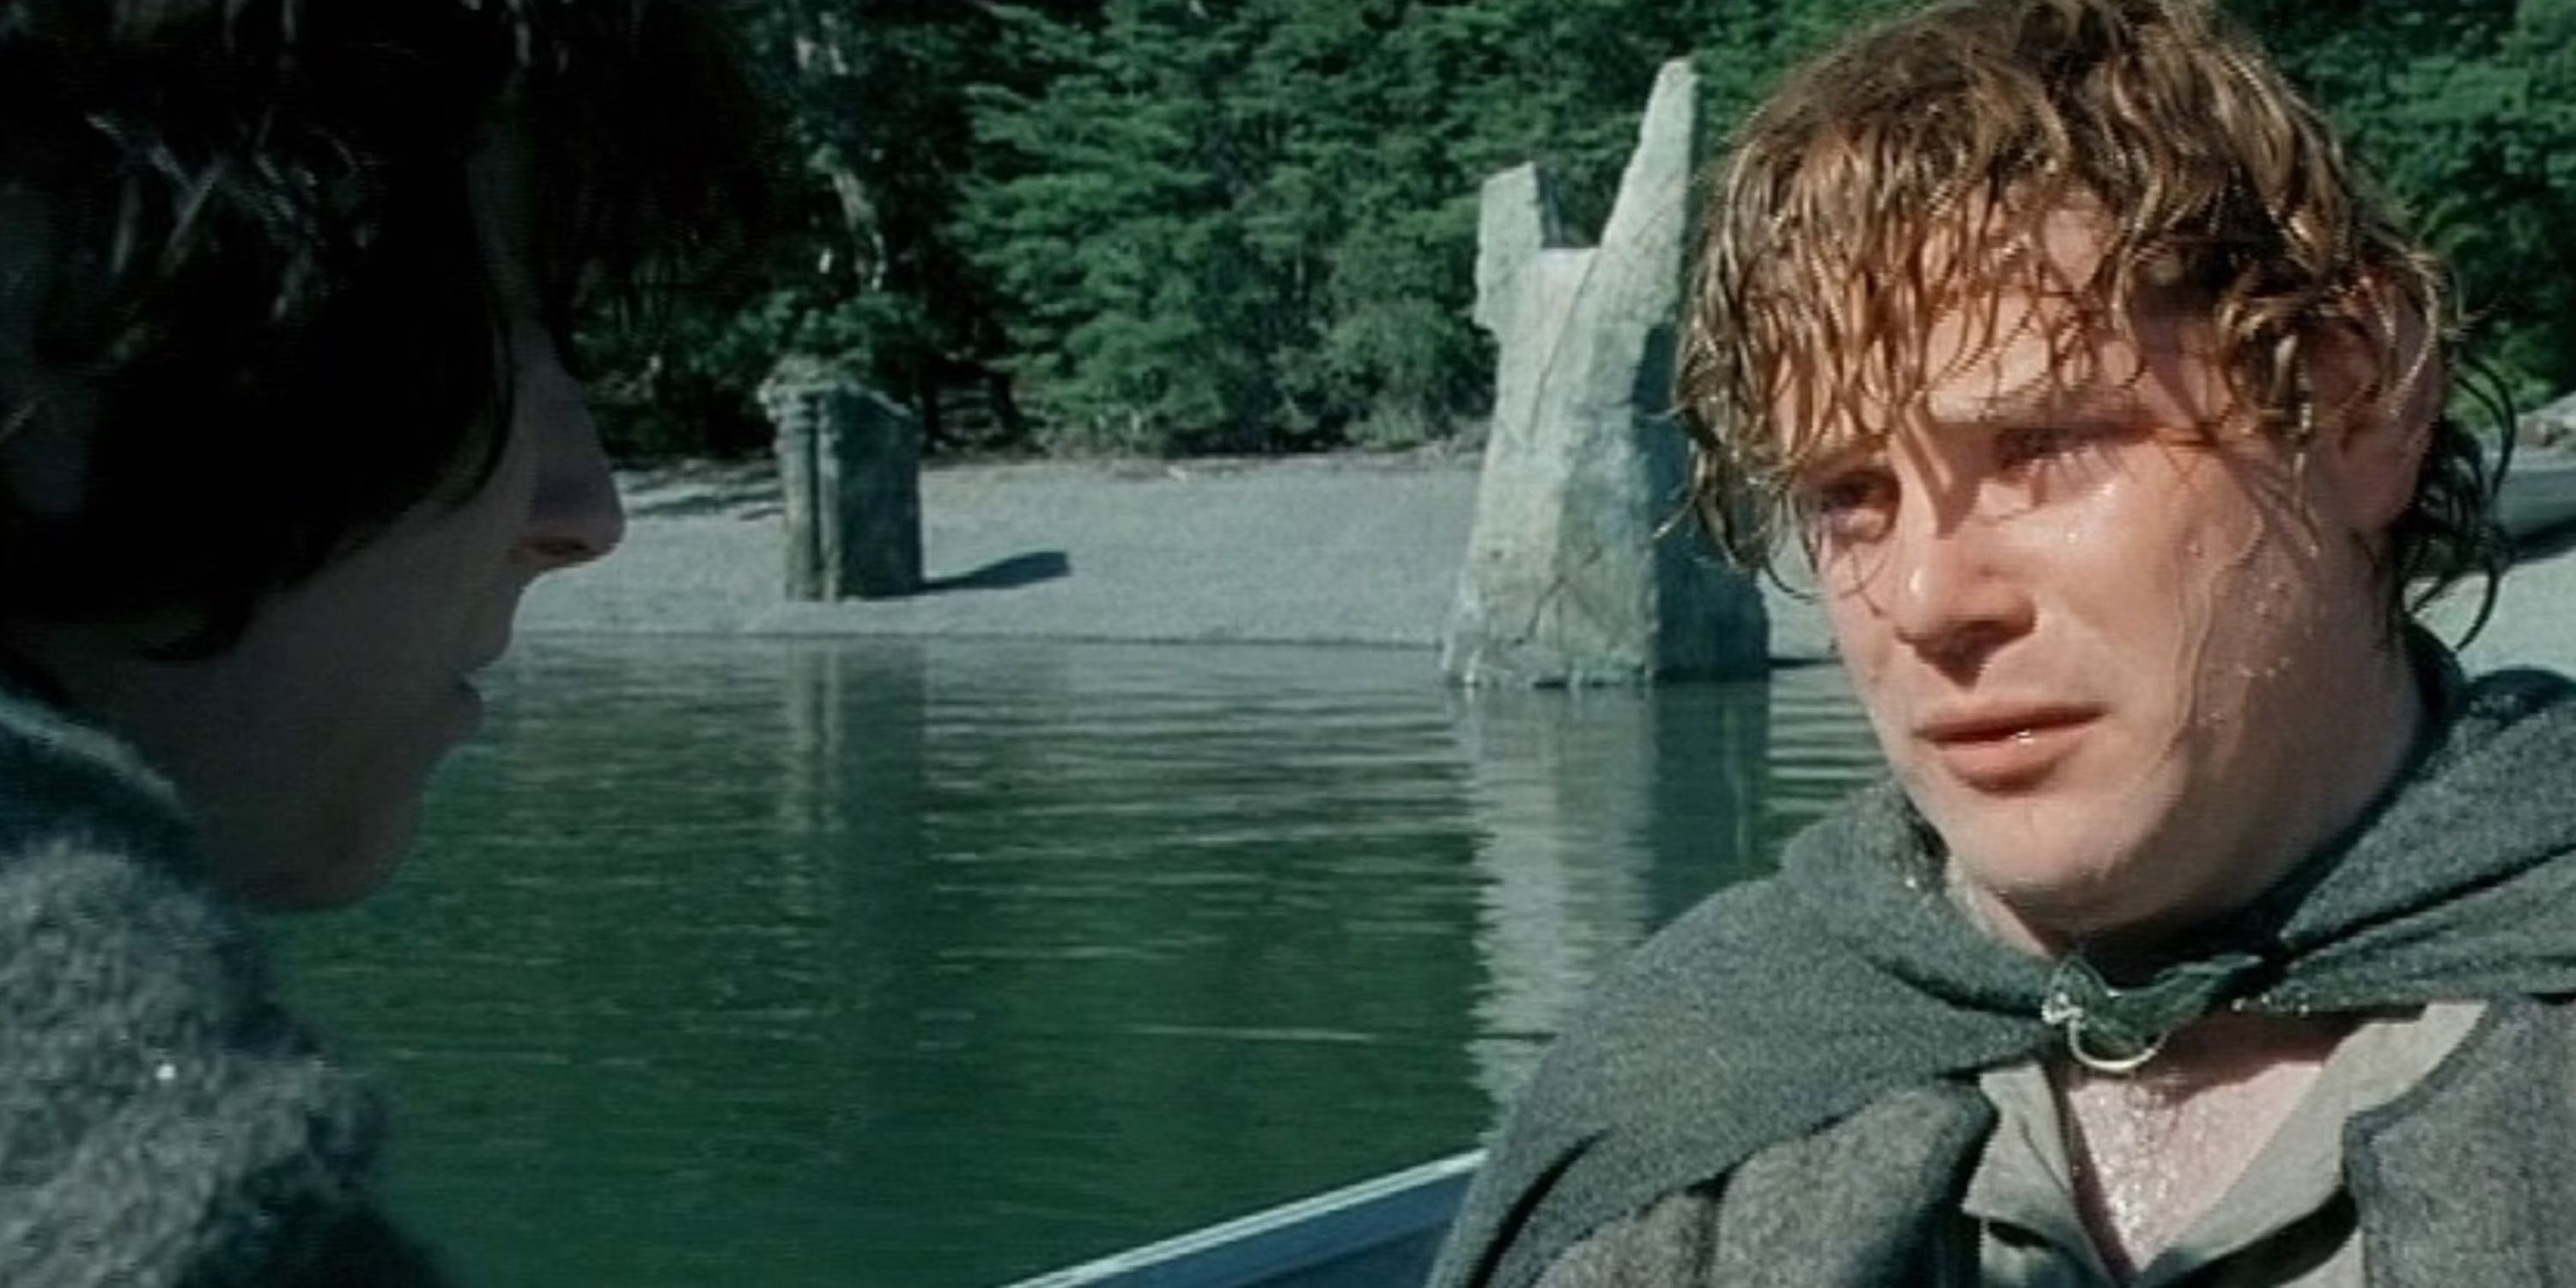 Sam in the boat with frodo after he follows him to Mordor in The Lord of the Rings_ The Fellowship of the Ring